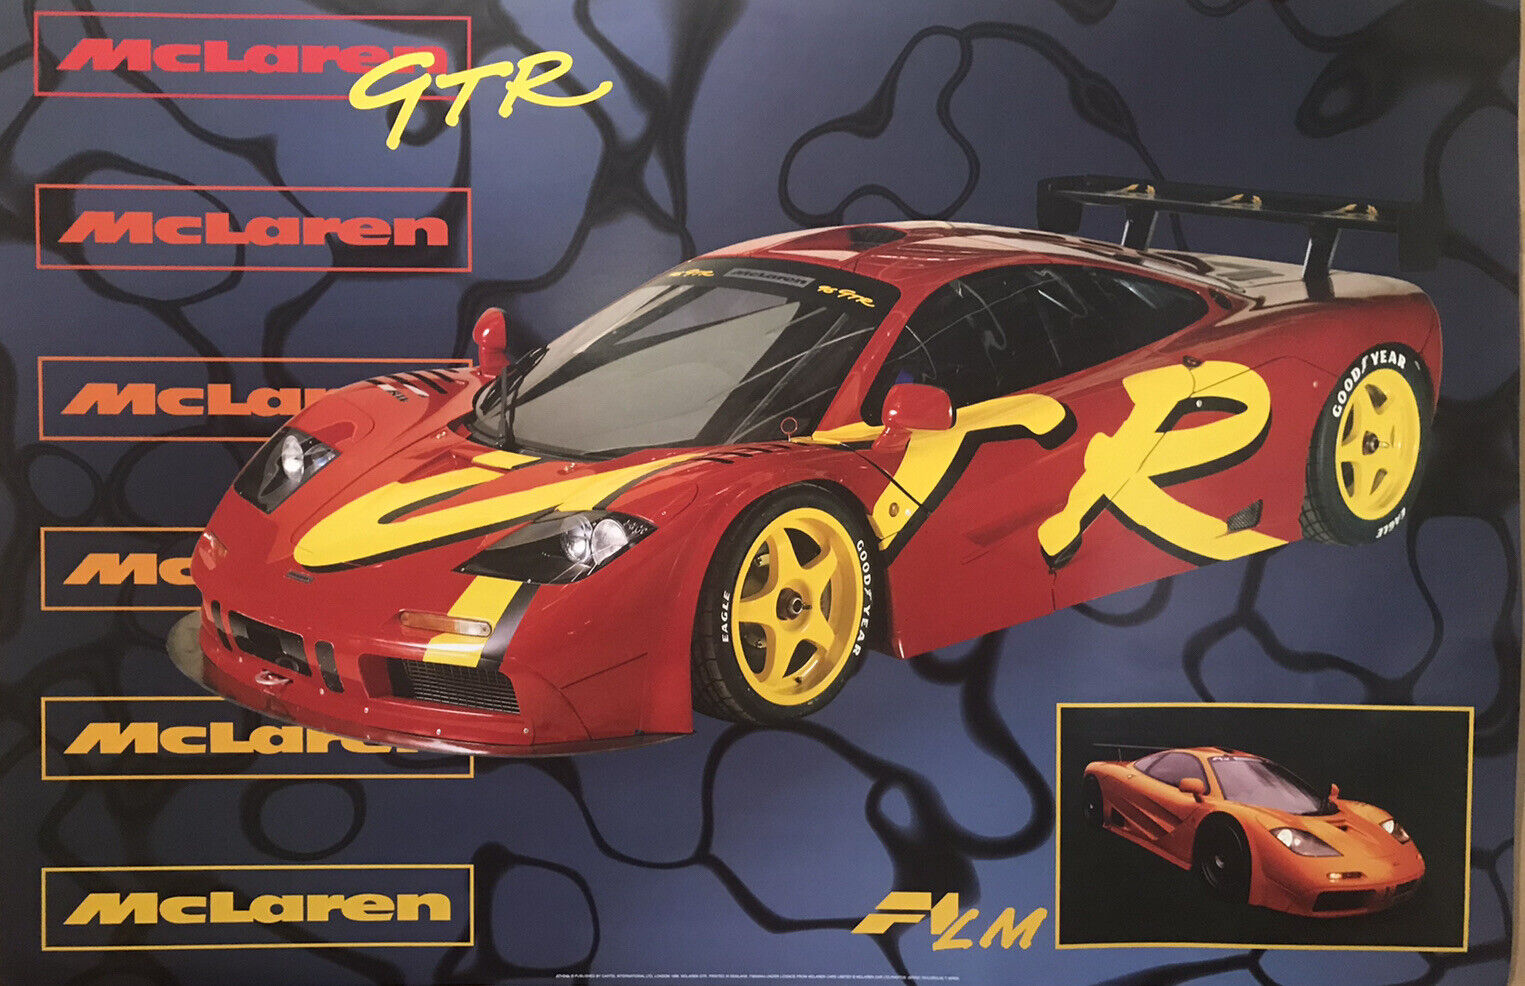 Mclaren GTR F1 LM 1996 Hard to Find Car Poster. WOW Out Of Print Rare Own it